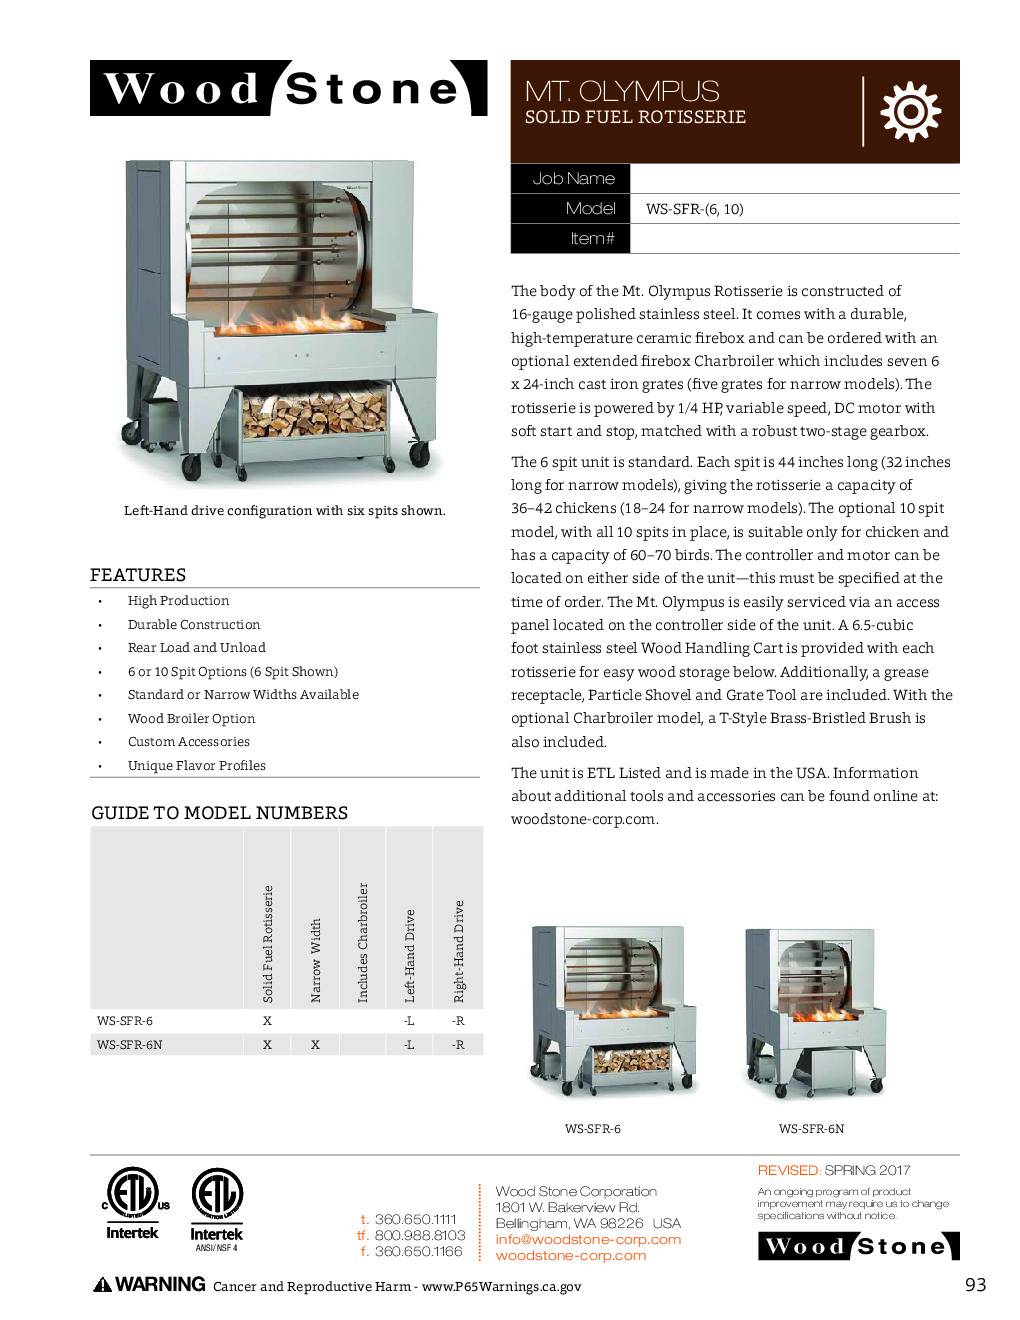 Wood Stone WS-SFR-6N-BROILER Rotisserie Solid-Fuel Oven